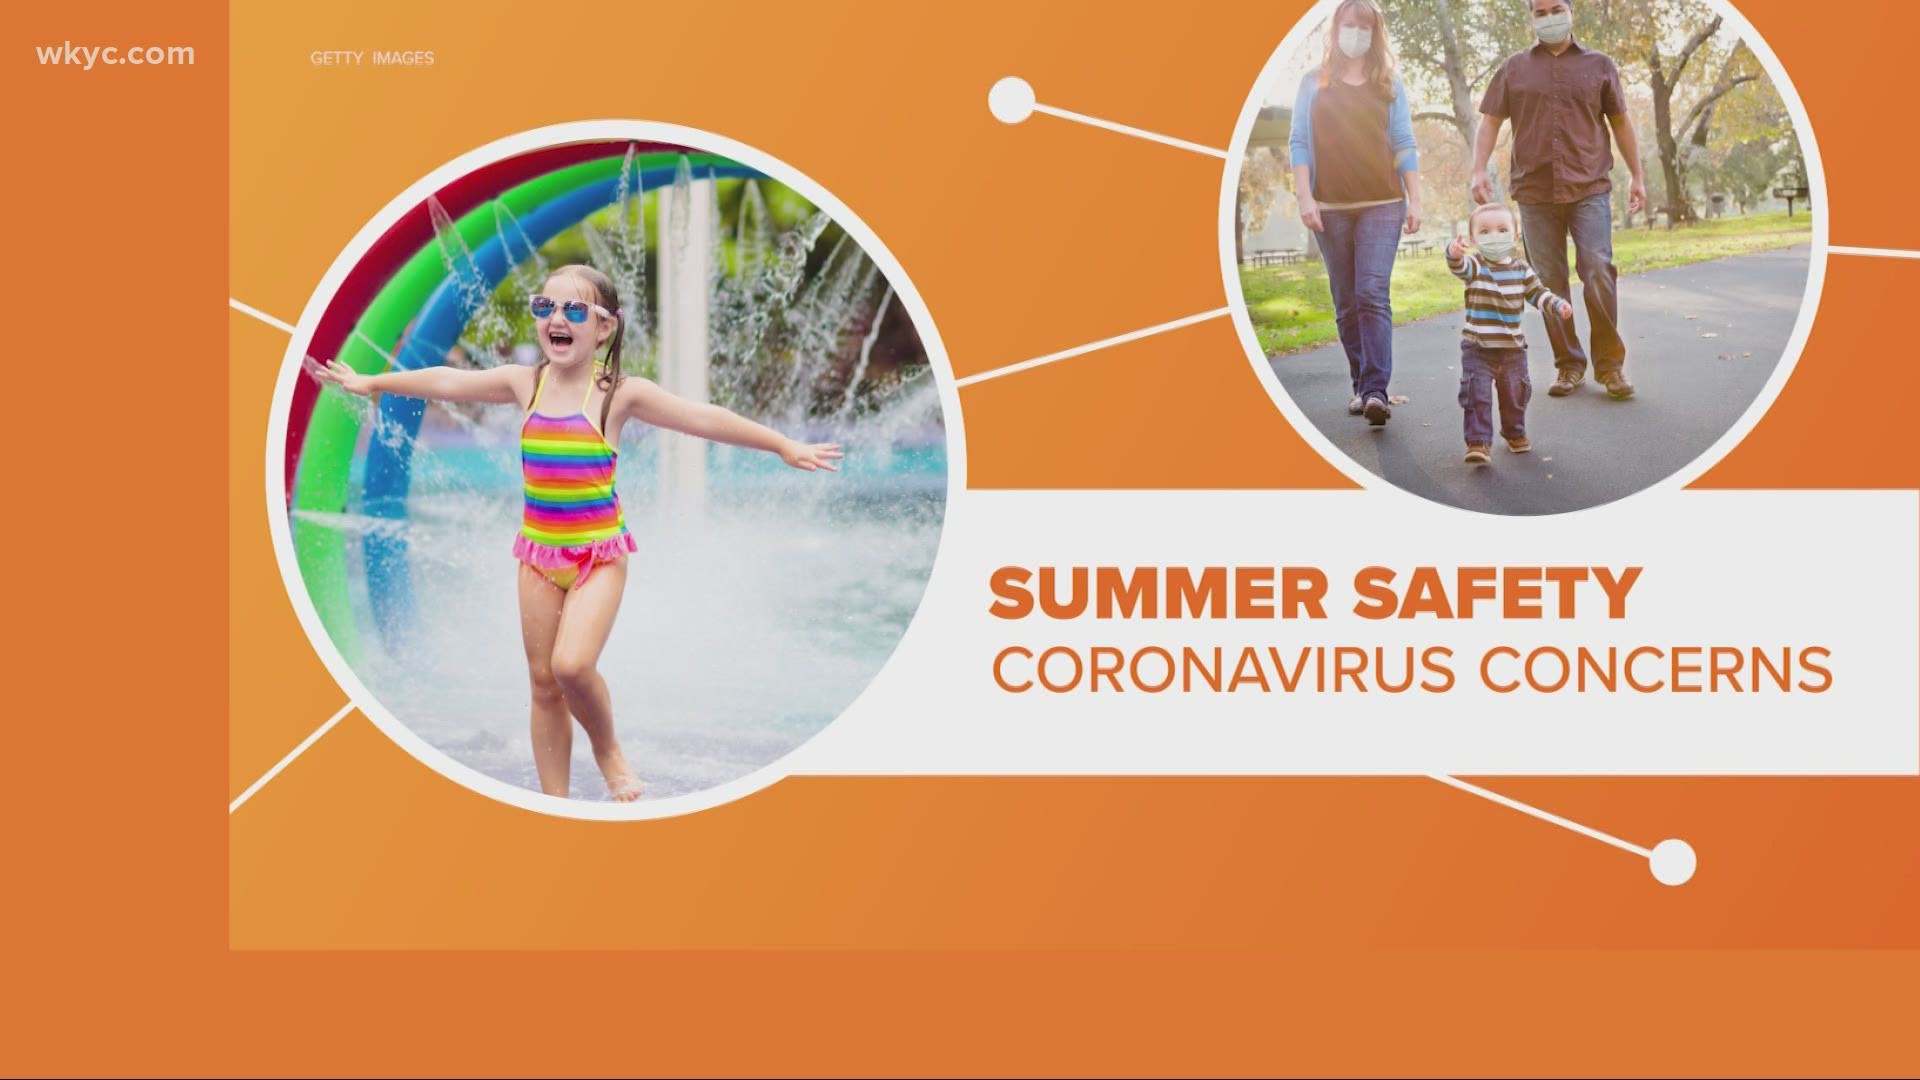 Summer is heating up and people want to get out, but coronavirus is still a cause for concern in a lot of communities. So how can you stay safe this summer?